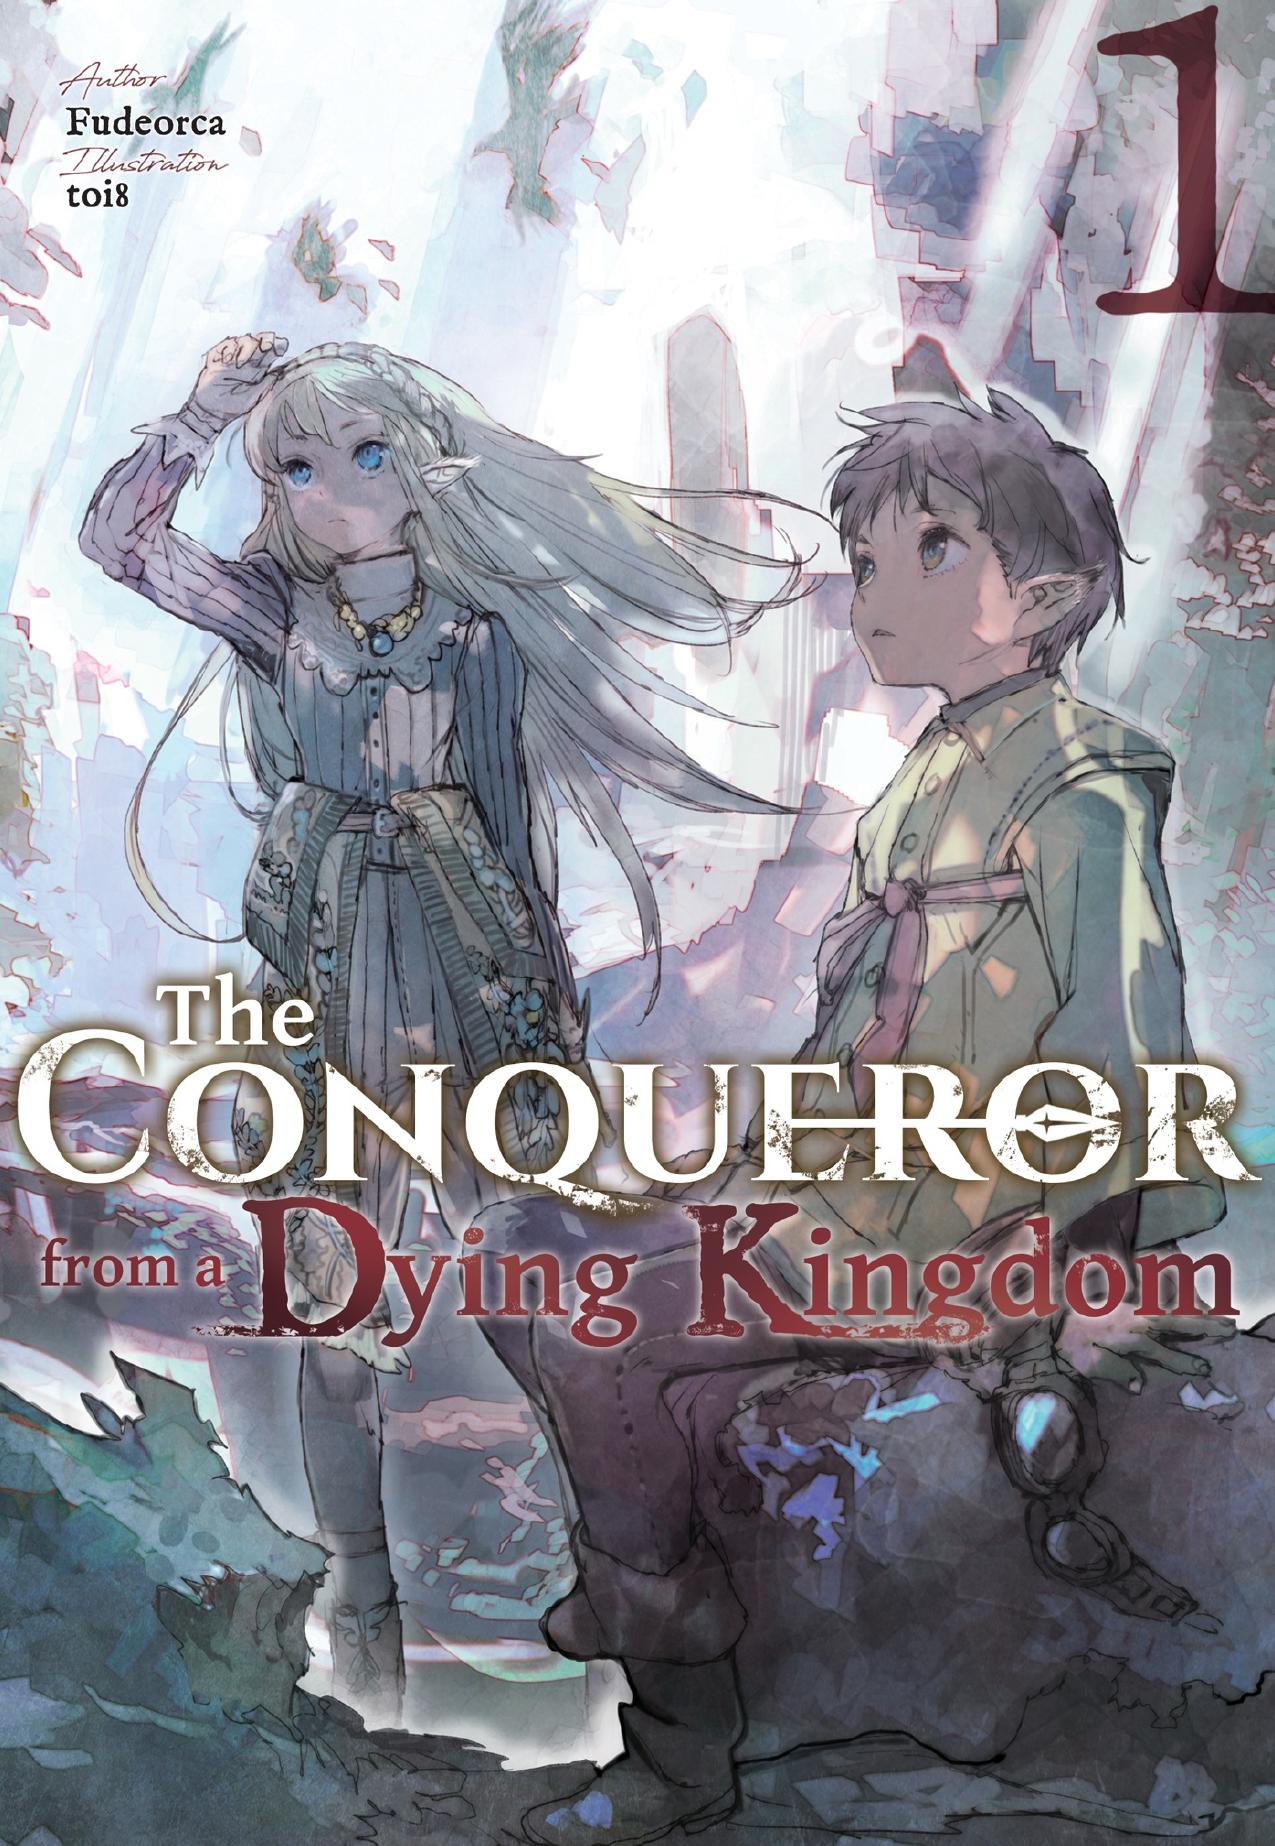 The Conqueror from a Dying Kingdom: Volume 1 by Fudeorca